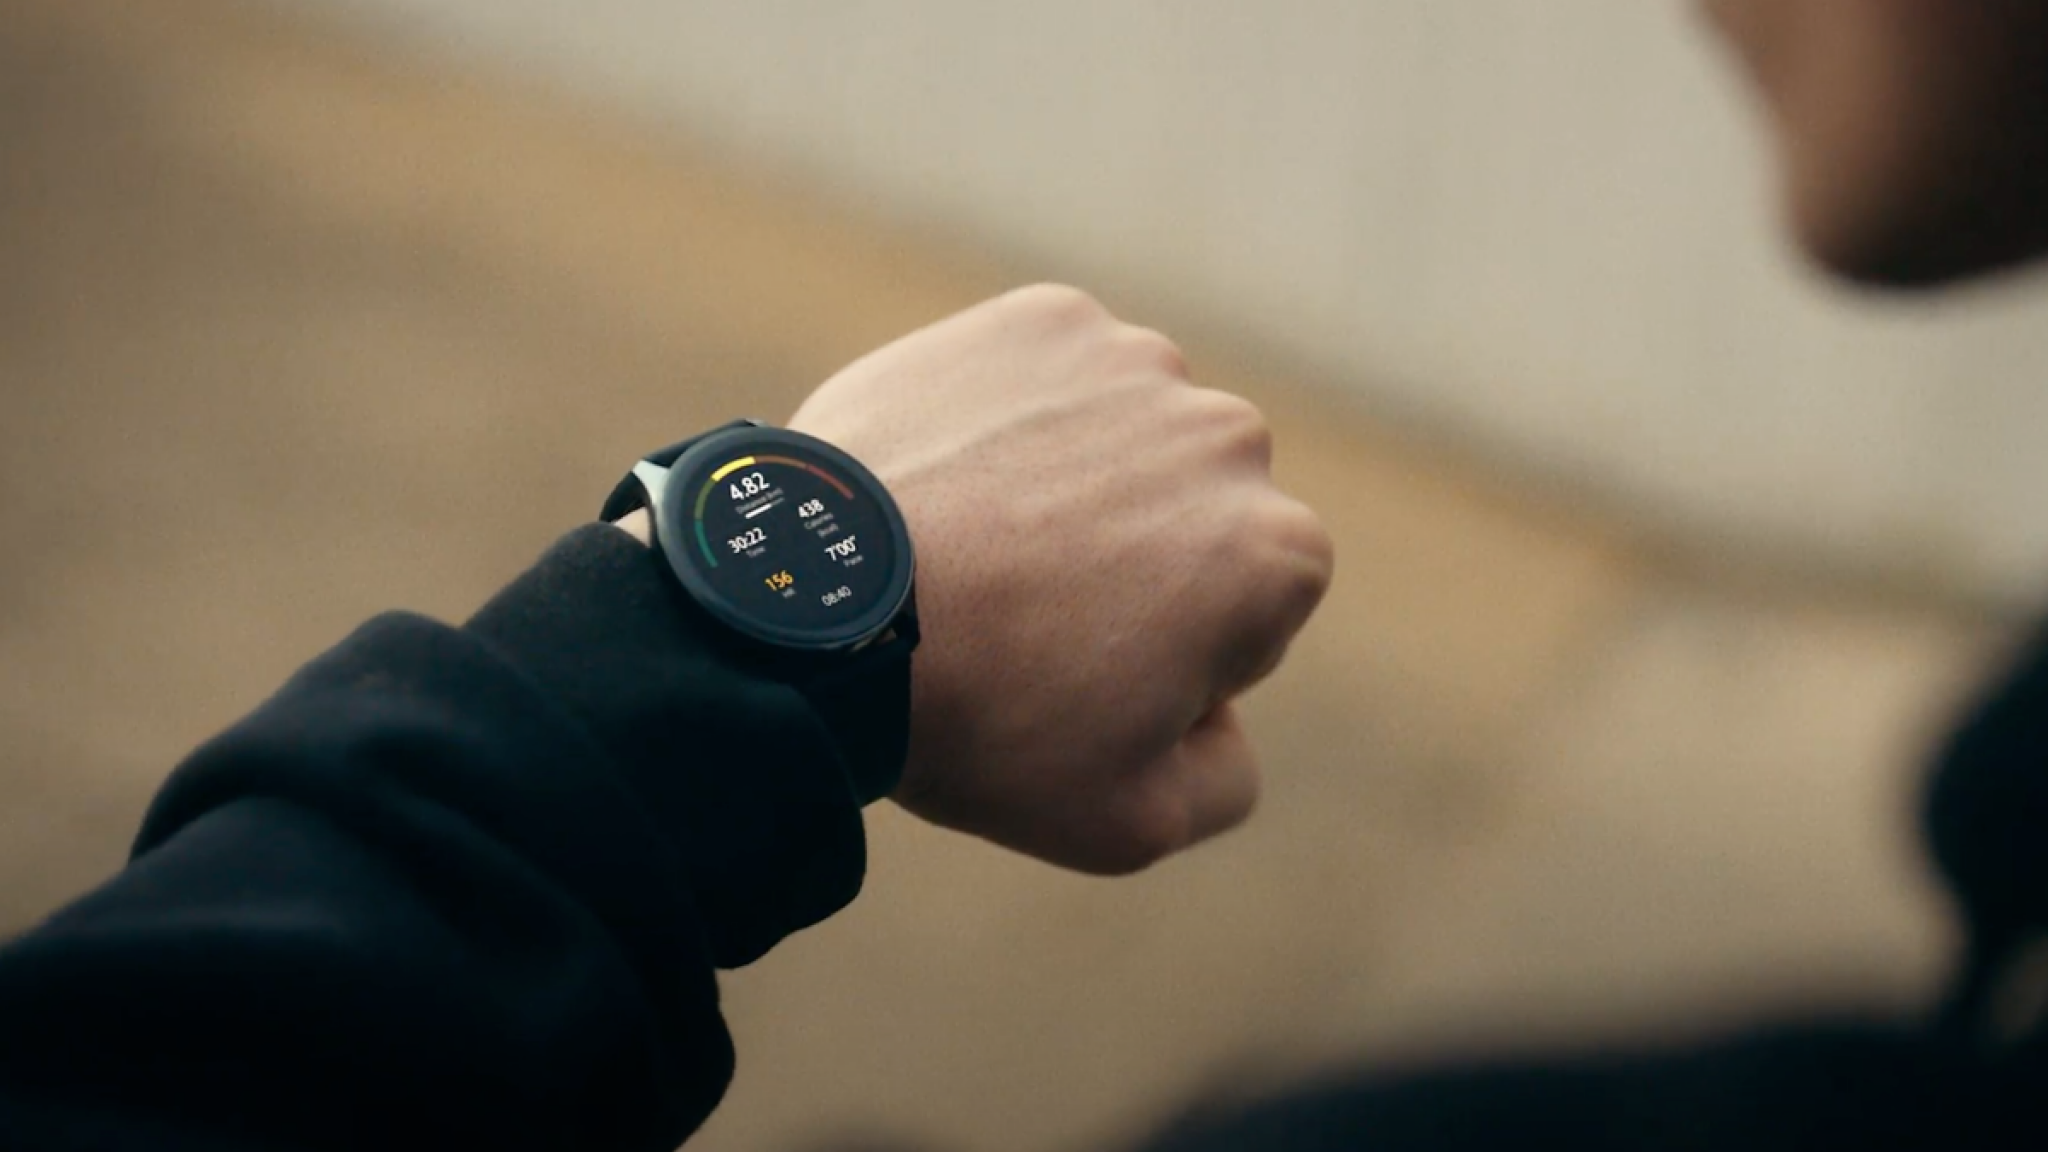 The Coolest Thing About the OnePlus Watch Is How Fast It Charges